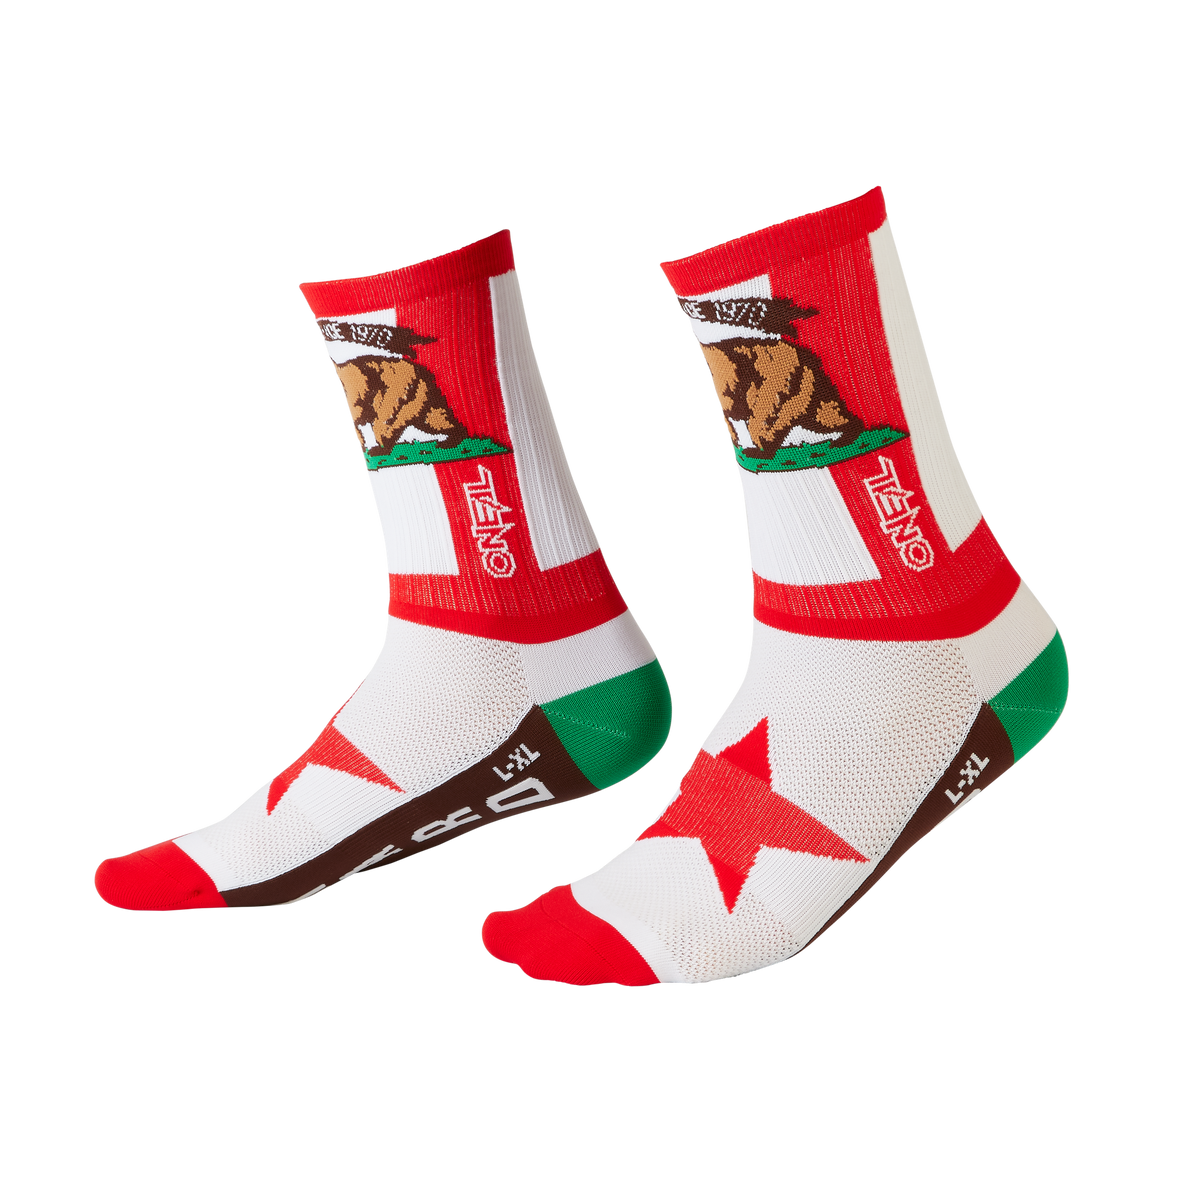 https://cdn.oneal.eu/assets/_default_upload_bucket/2022_ONeal_MTB%20PERFORMANCE%20SOCK_CALIFORNIA%20V.22_red%20white%20brown_side_1.png